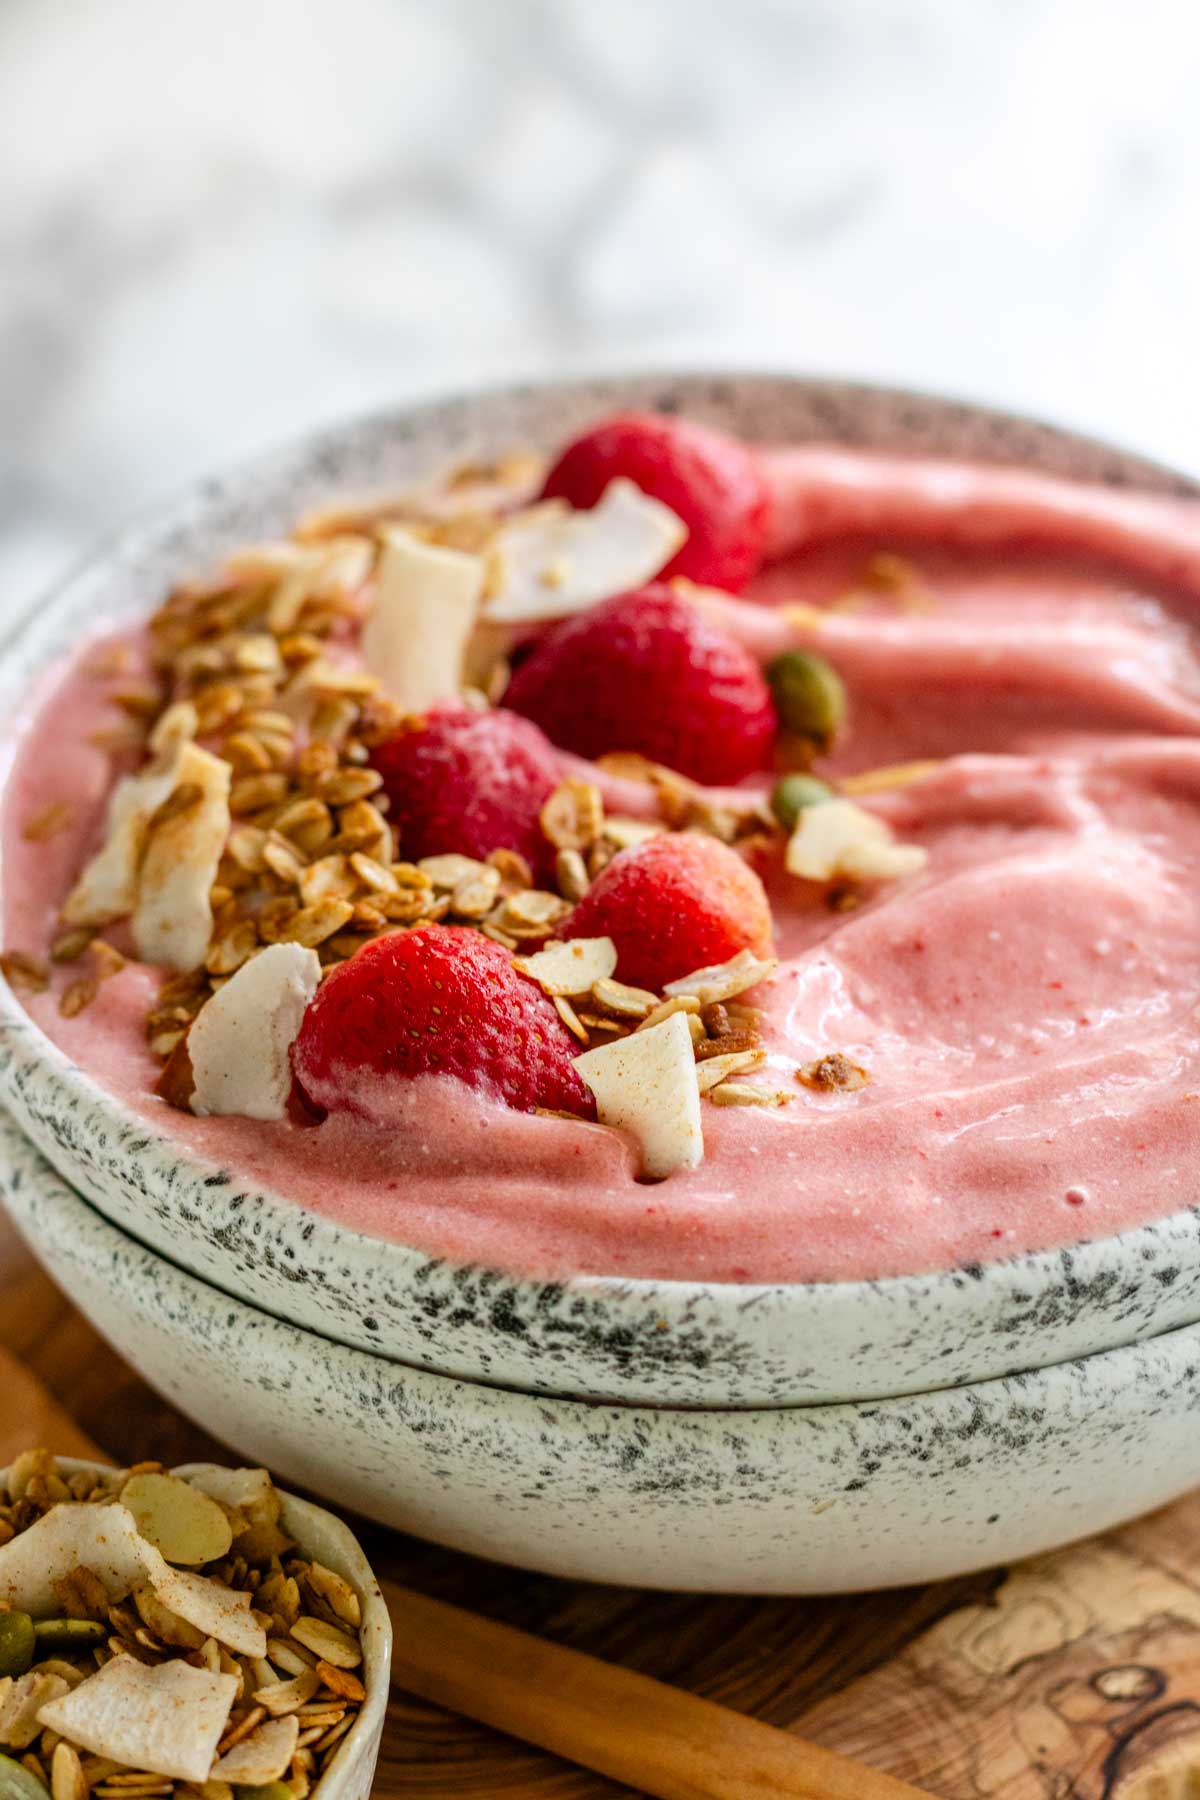 A pink smoothie bowl with strawberries and granola on top.